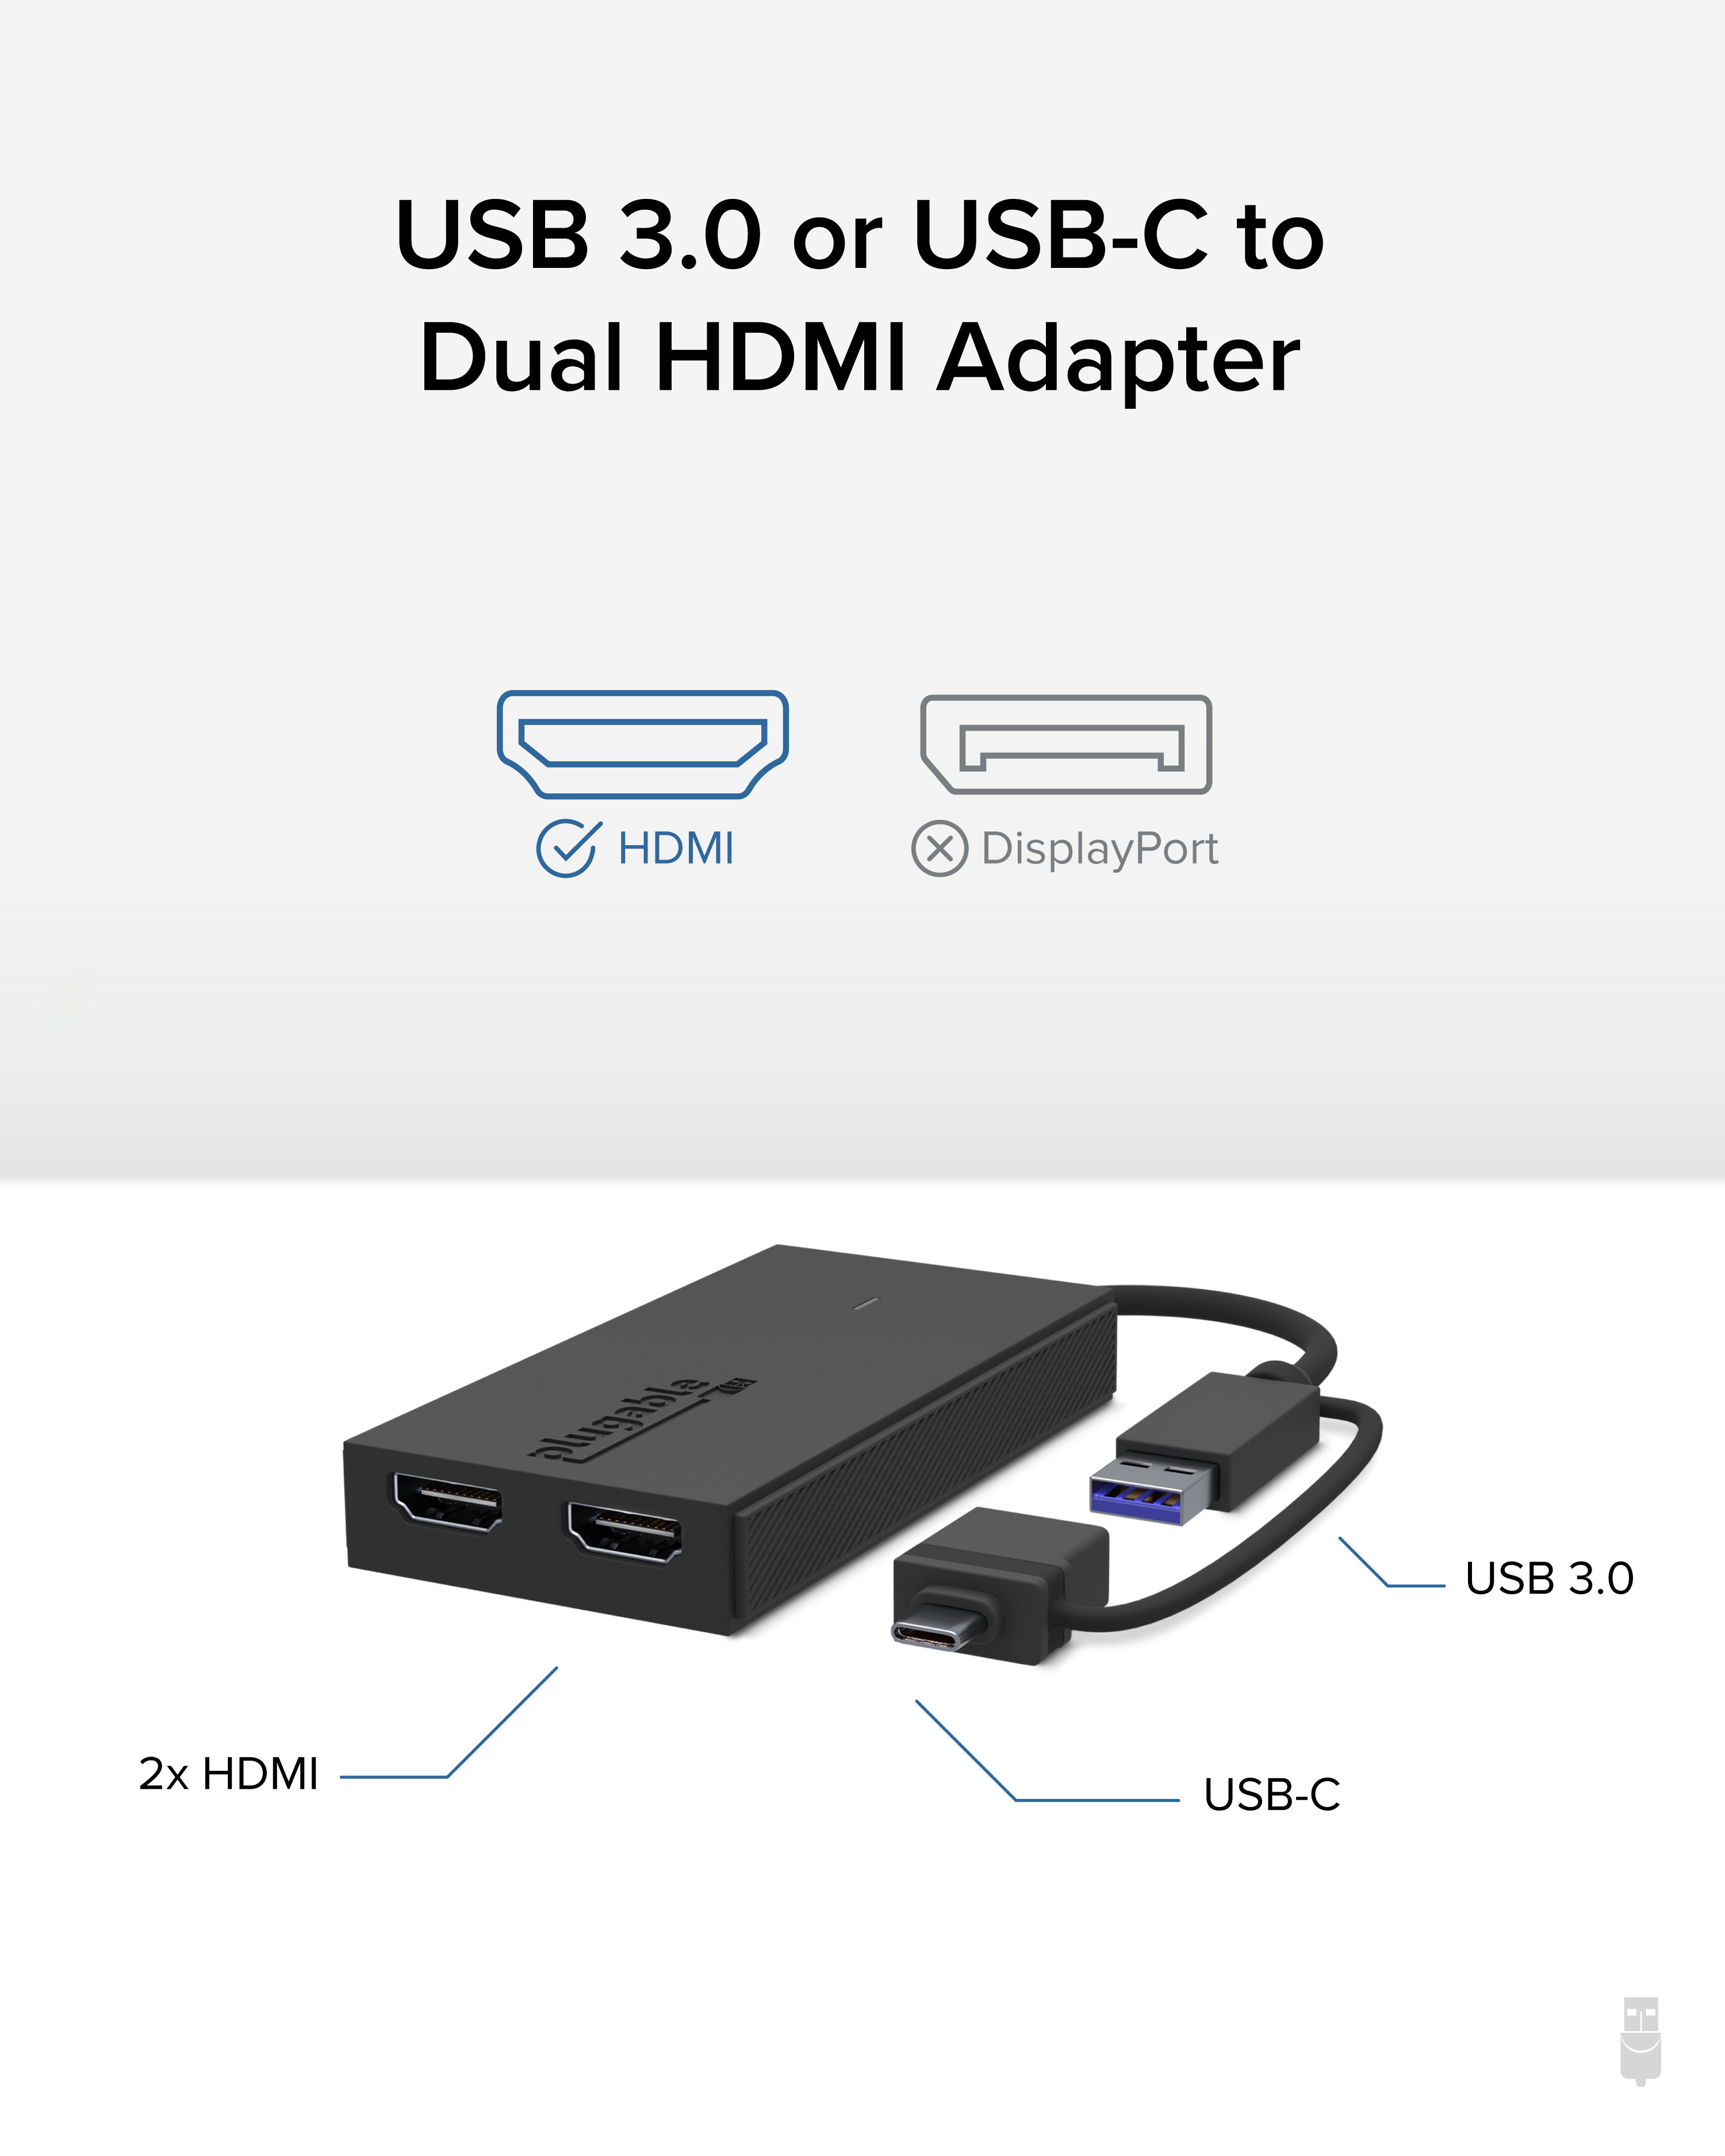 Plugable USB 3.0 or USB C to HDMI Adapter for Dual Monitors, Universal Video Graphics Adapter for Mac and Windows, Thunderbolt, USB 3.0 or USB-C - image 4 of 7